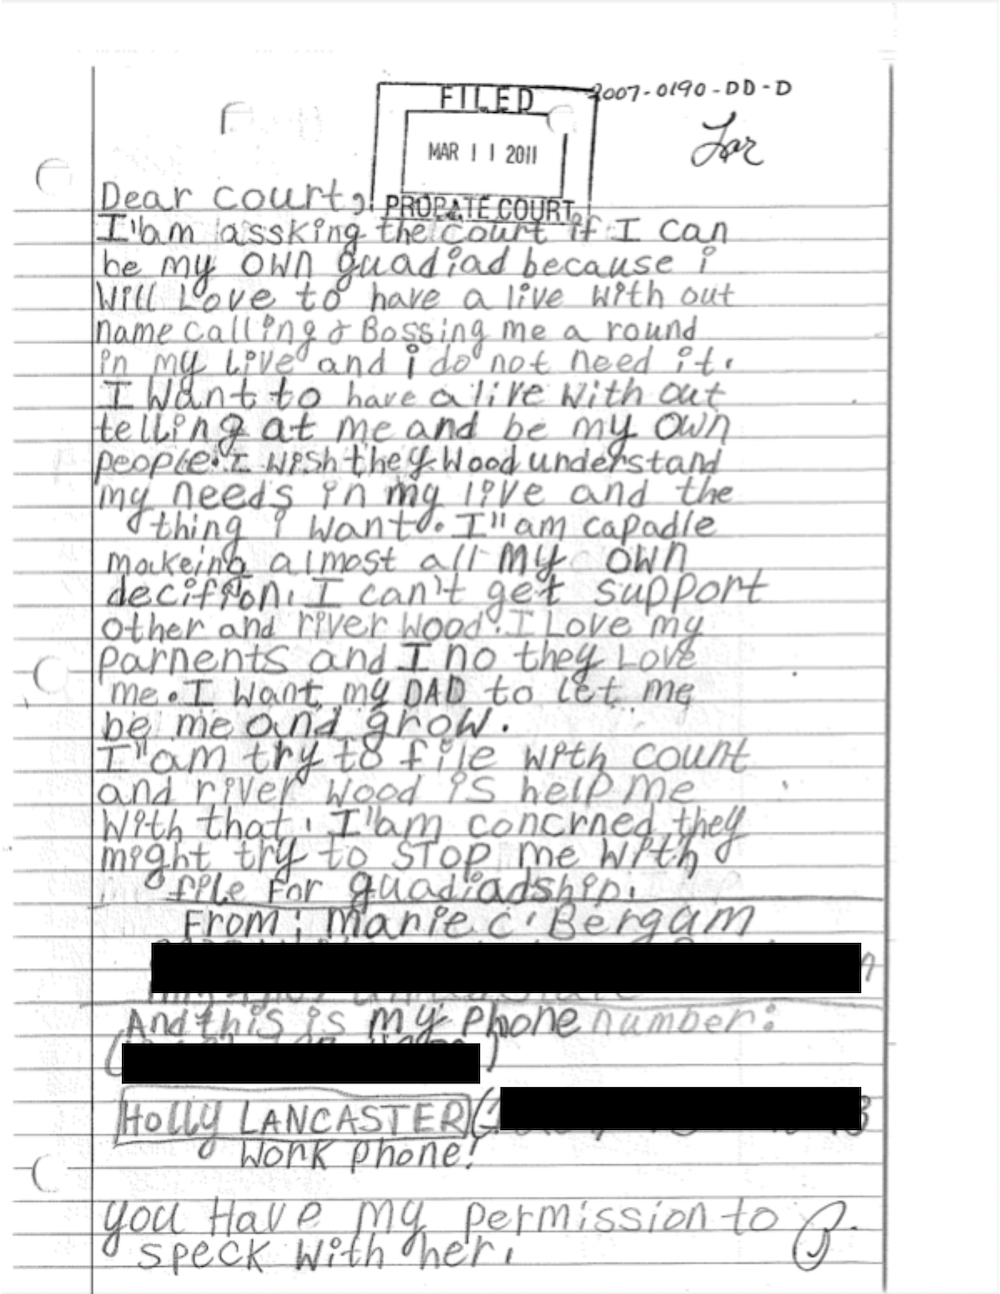 A photo of the letter Marie wrote, asking the court to end her guardianship.